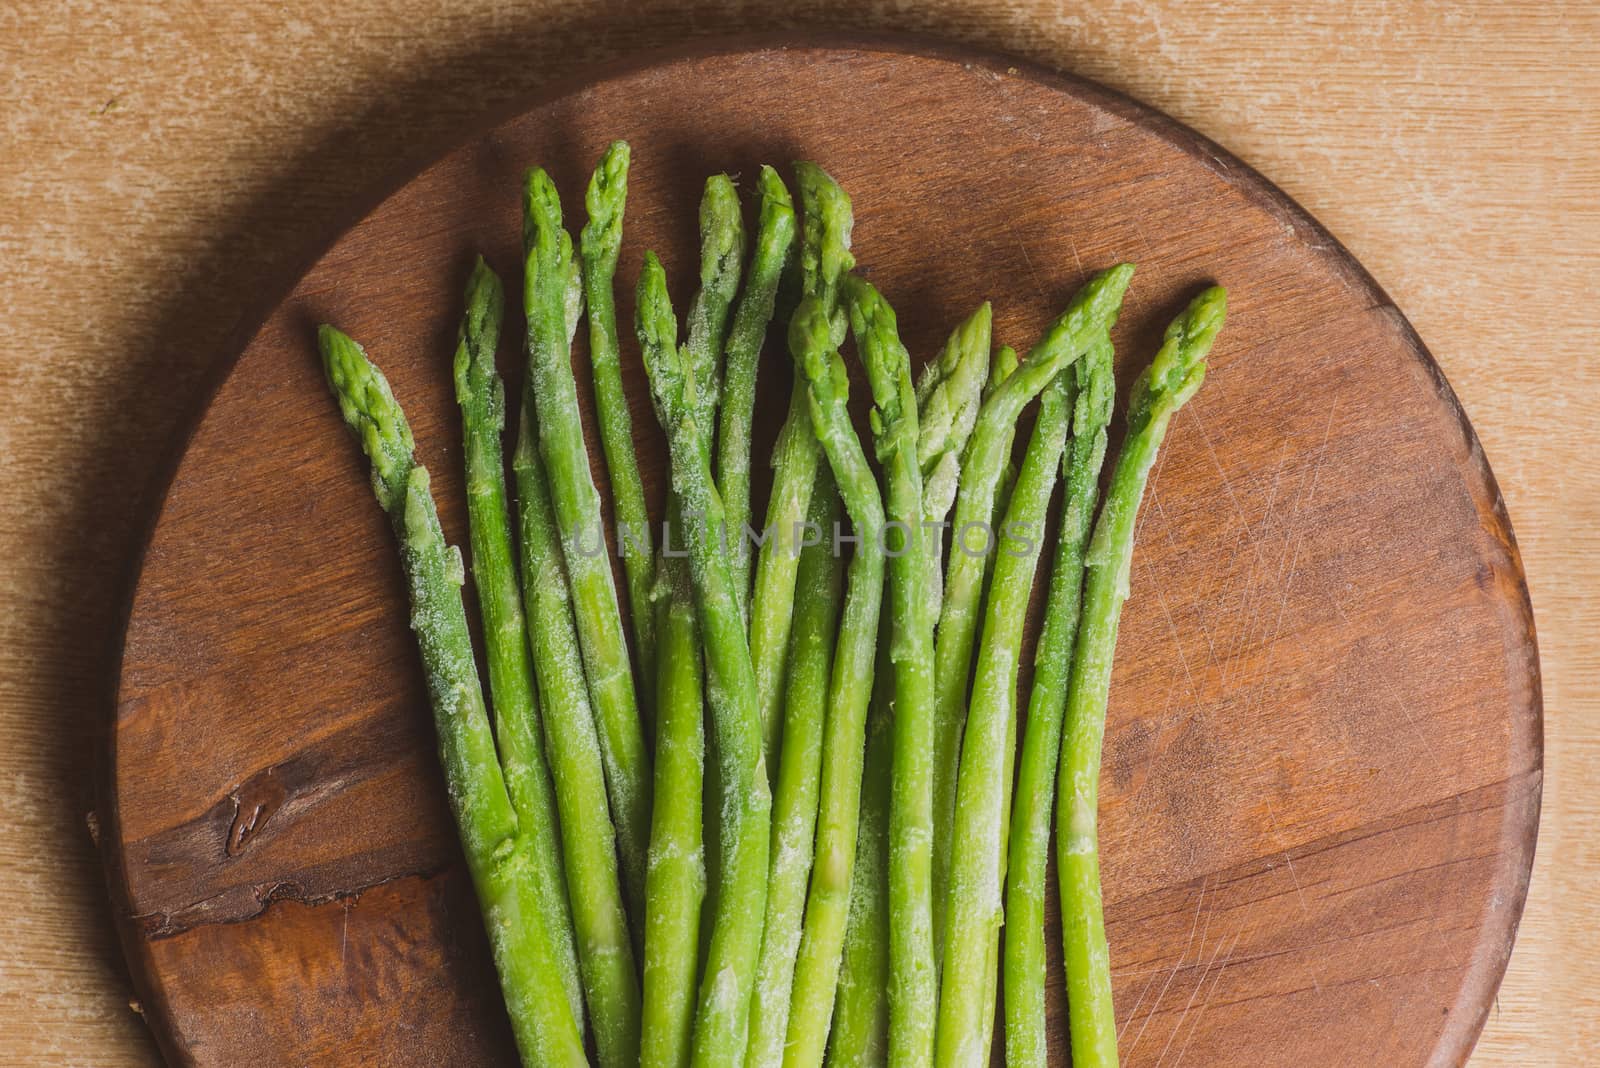 Frozen sticks of asparagus on rustic wood background. horizontal view